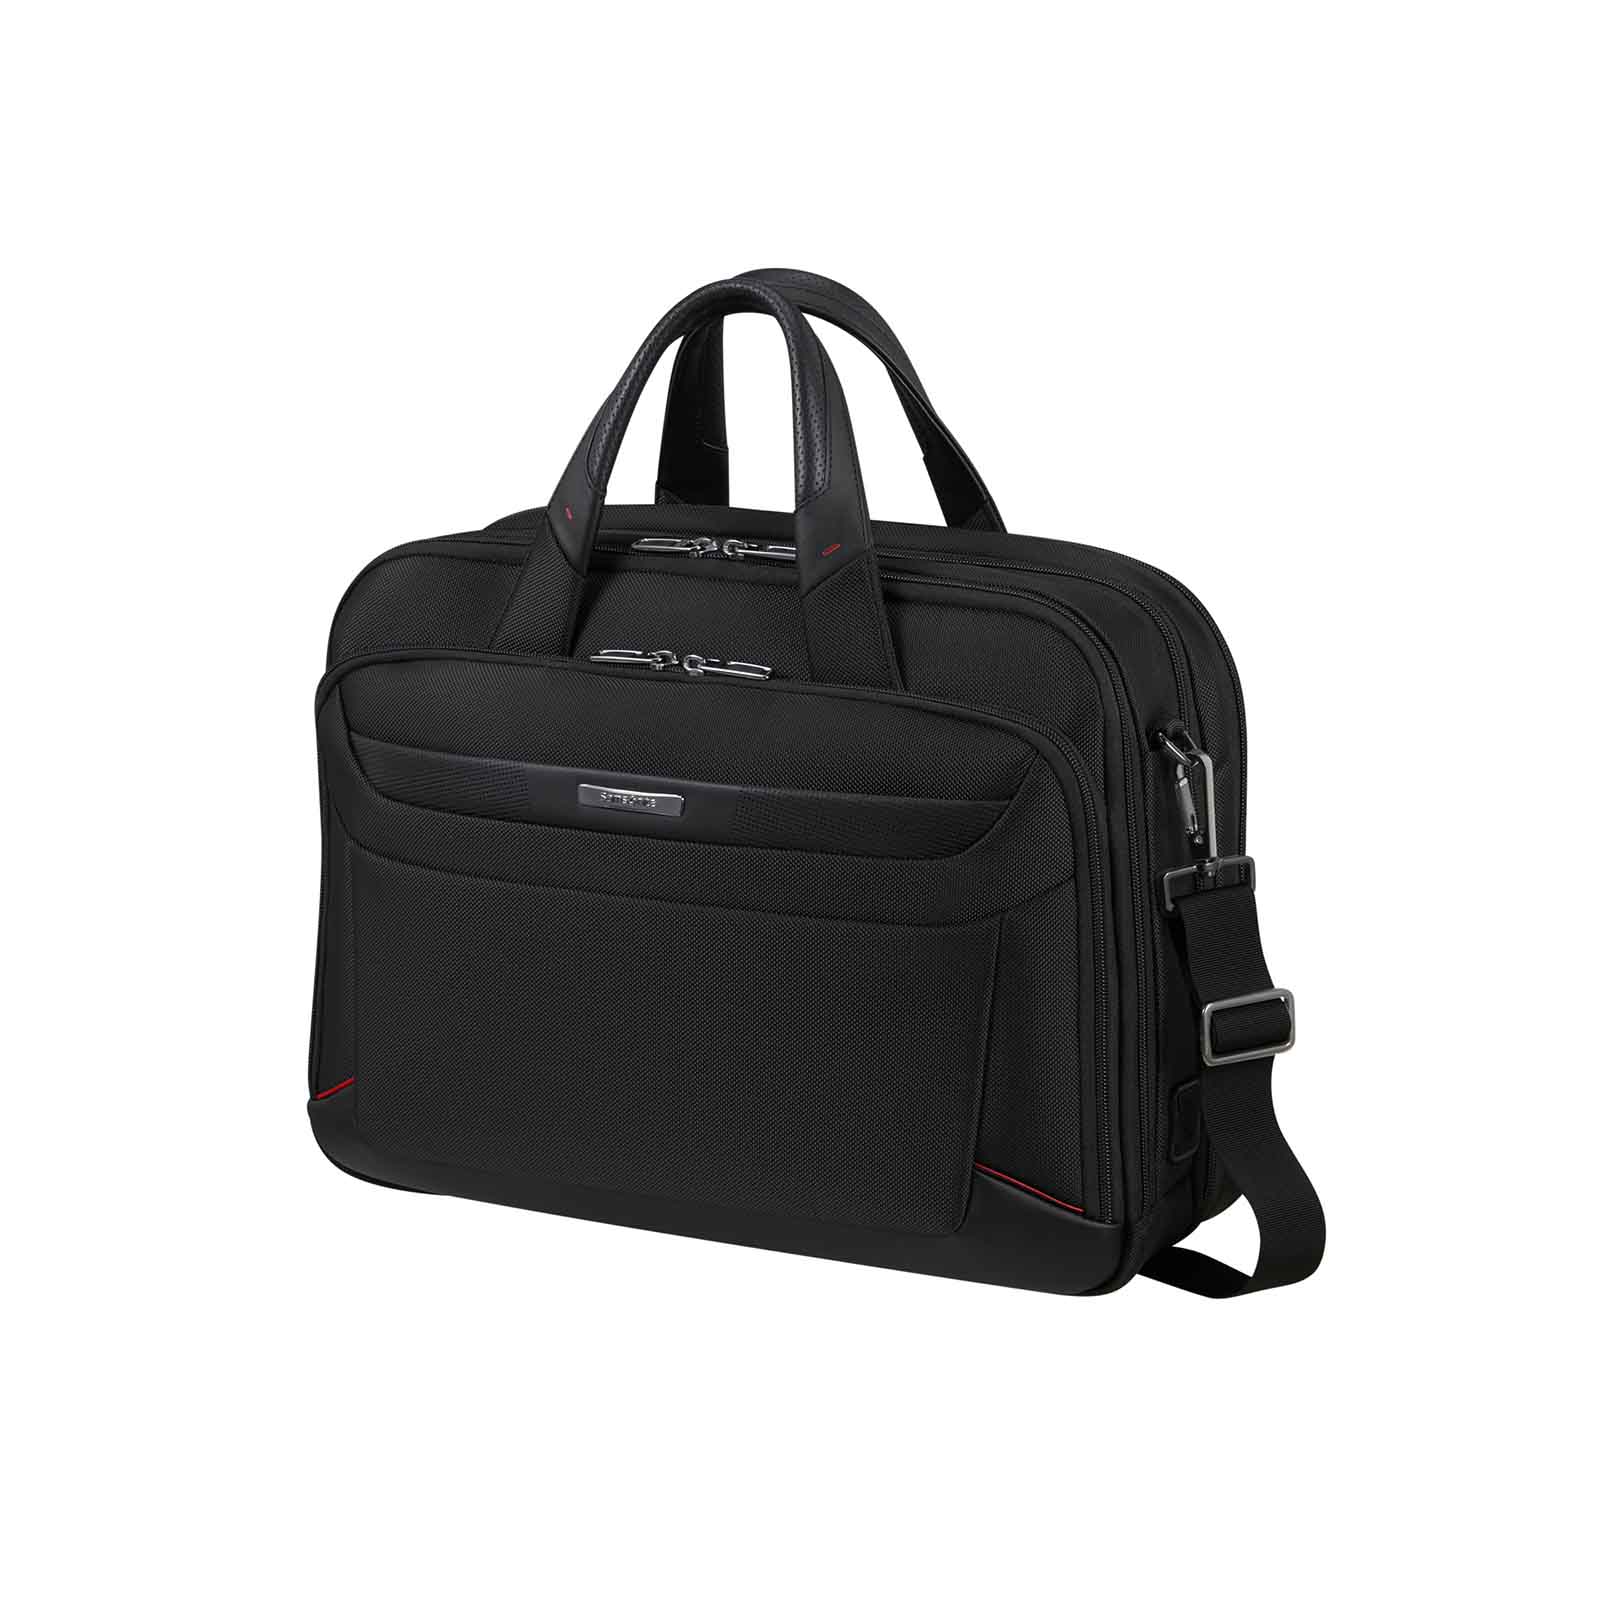 Samsonite-Pro-Dlx-6-Laptop-Bailhandle-15-Inch-Front-Angle